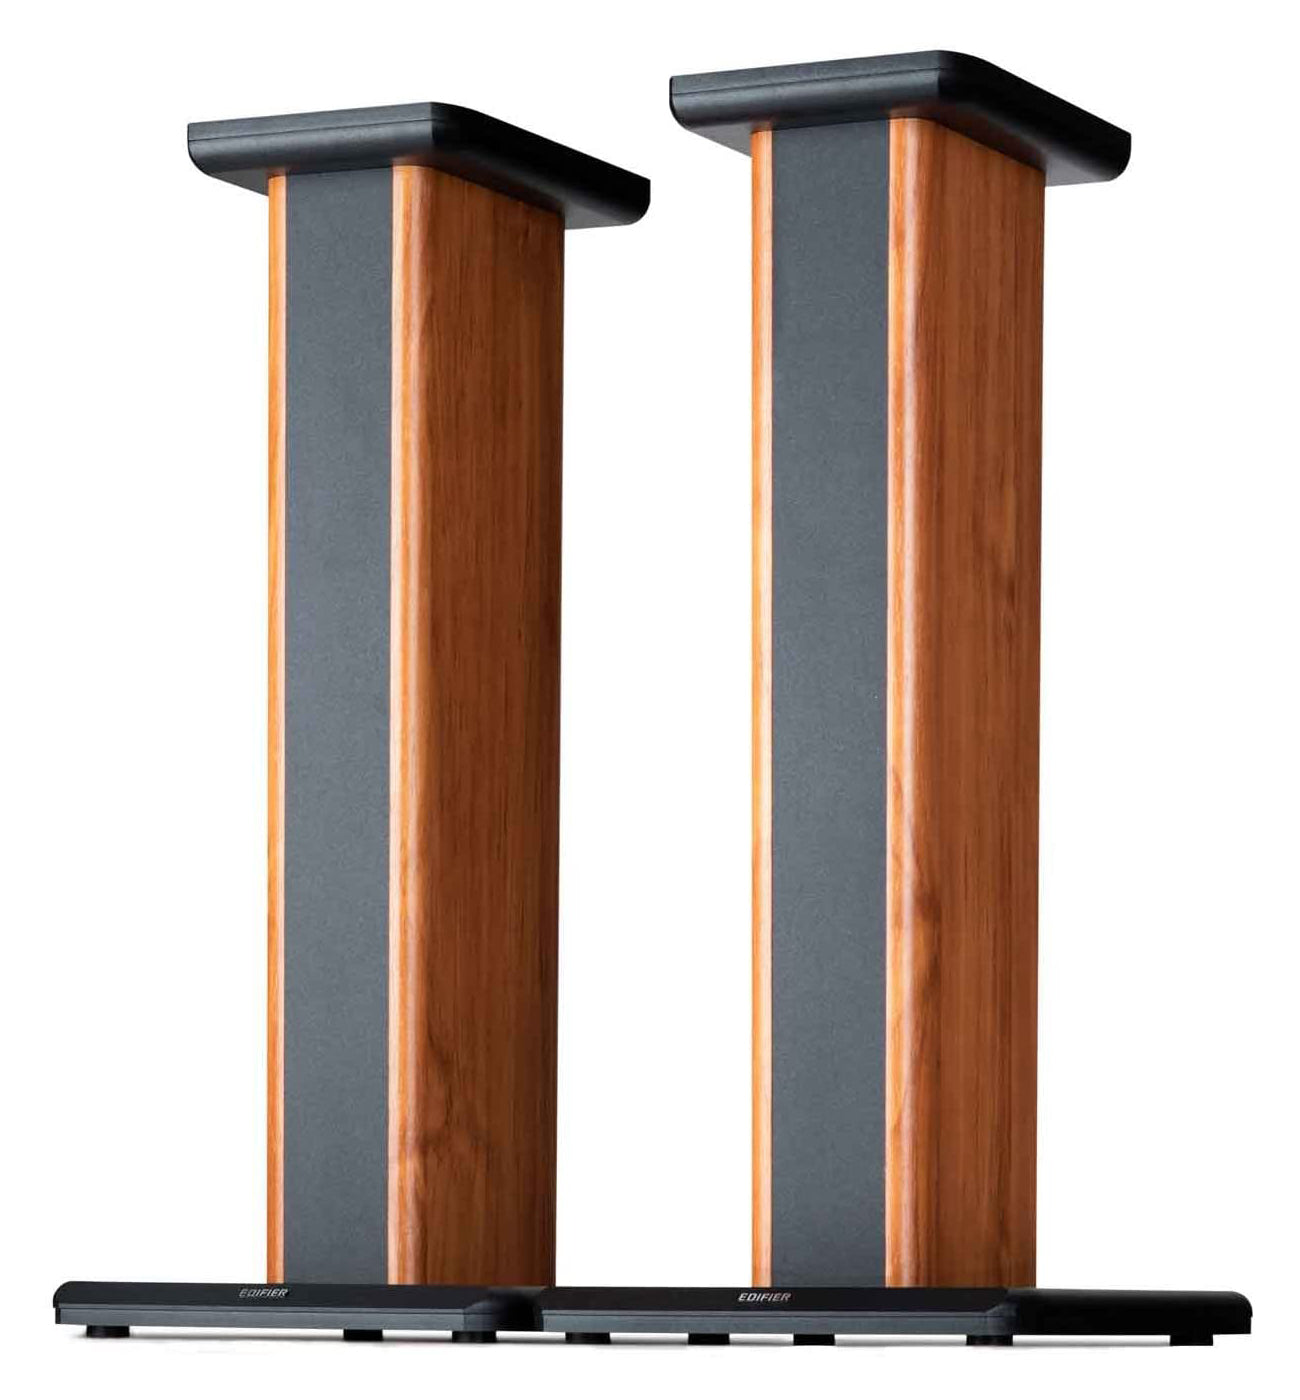 Edifier SS02 Pair Of Speaker Stands ONLY For S1000DB / S1000MKII & S2000PRO